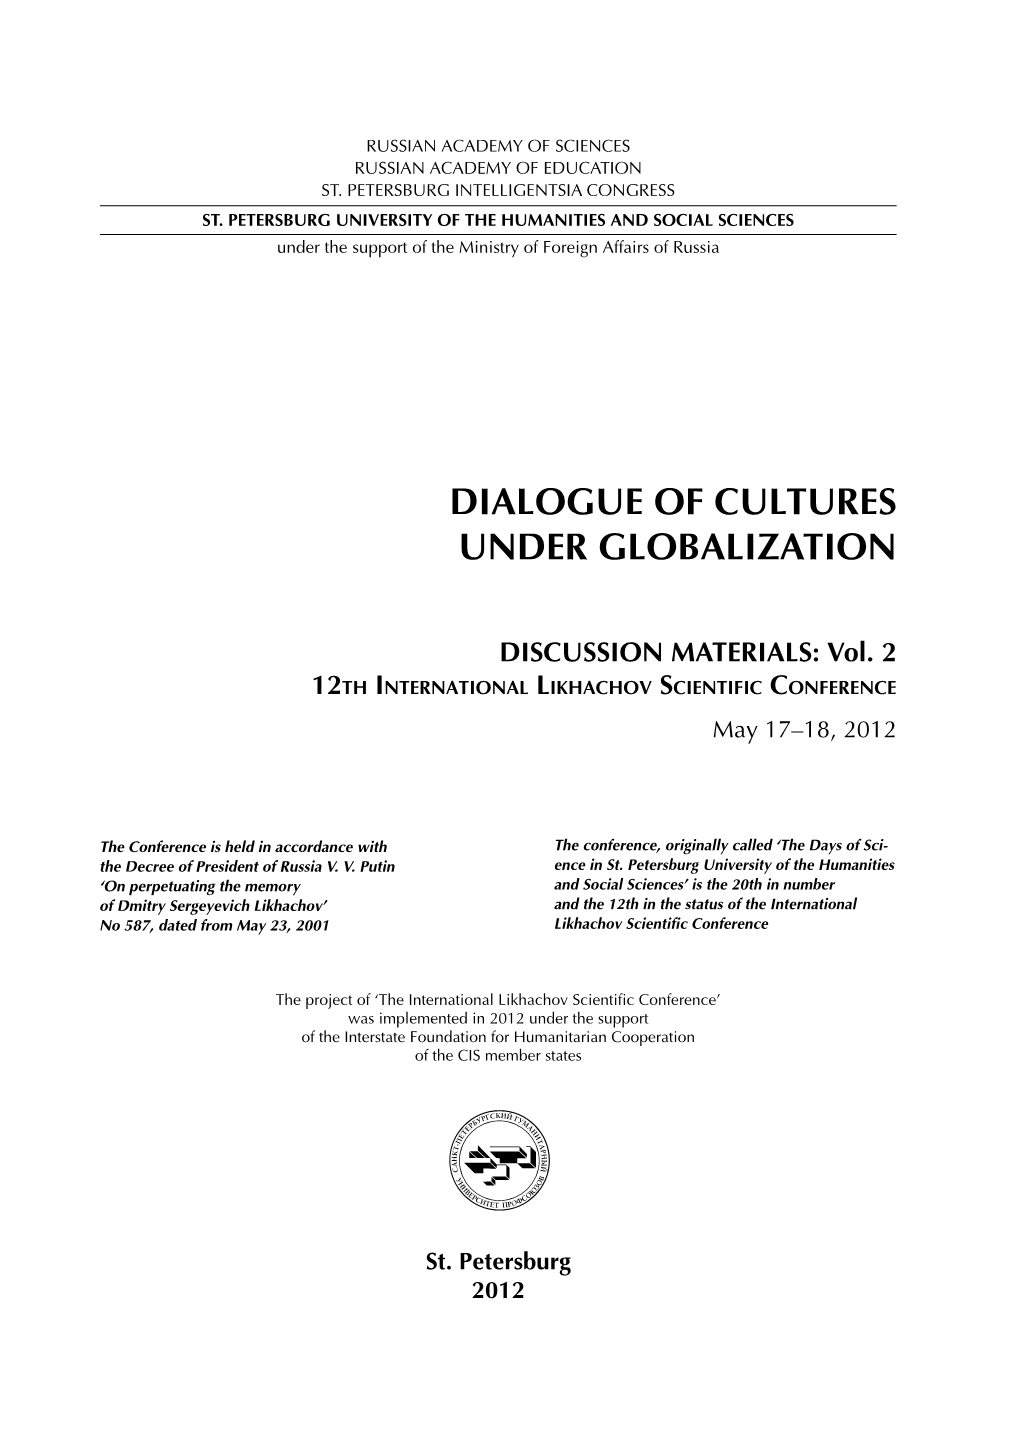 Dialogue of Cultures Under Globalization